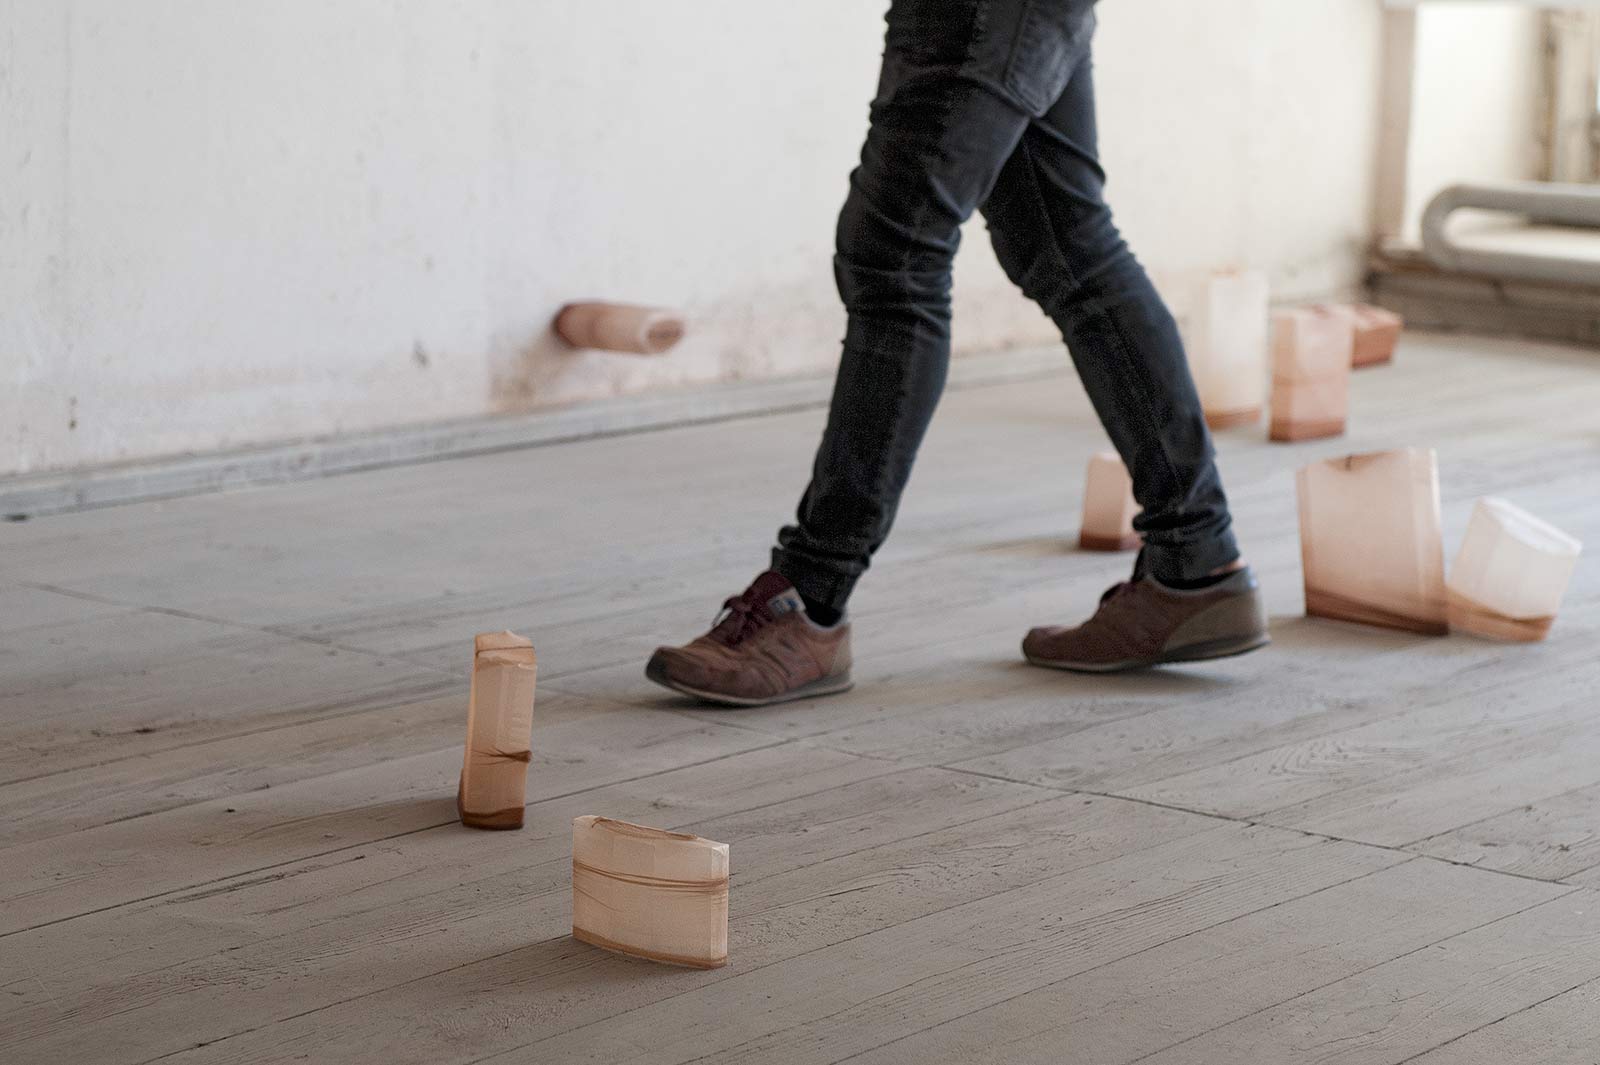 A person walks between the objects of the object installation "shaped bodies".